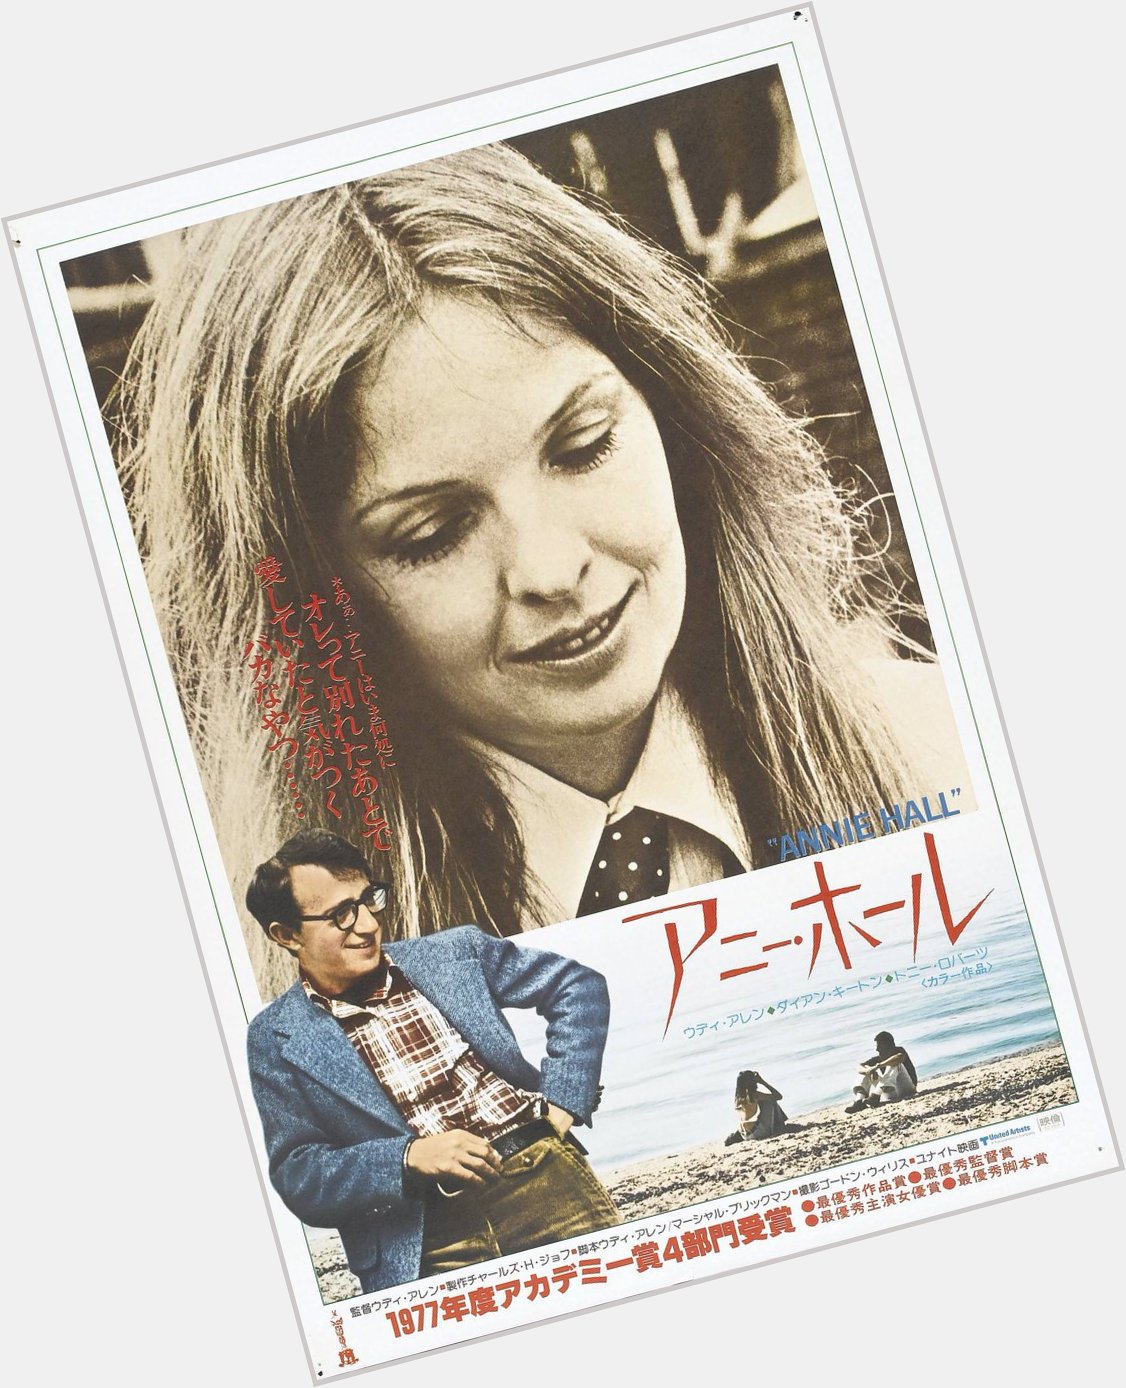 Happy birthday to Diane Keaton - ANNIE HALL - 1977 - Japanese release poster 